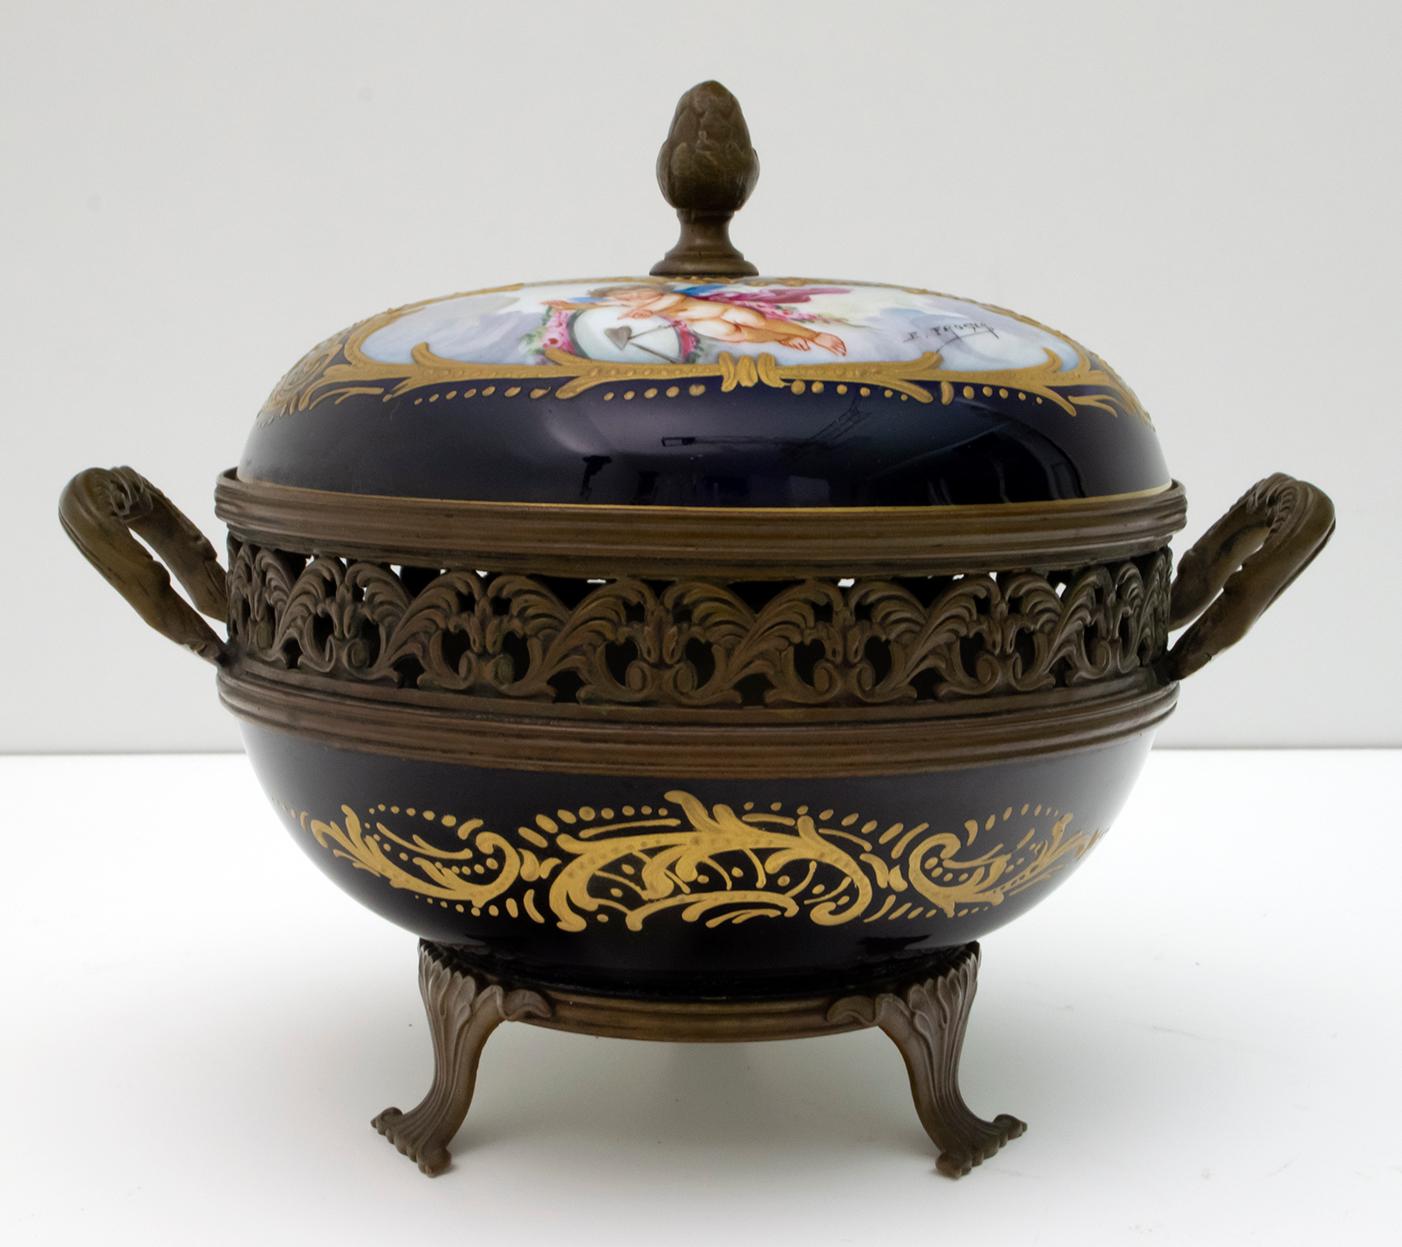 Patinated Signed E. Froger 19th Century French Porcelain Potpourri by Sevres, 1880 For Sale